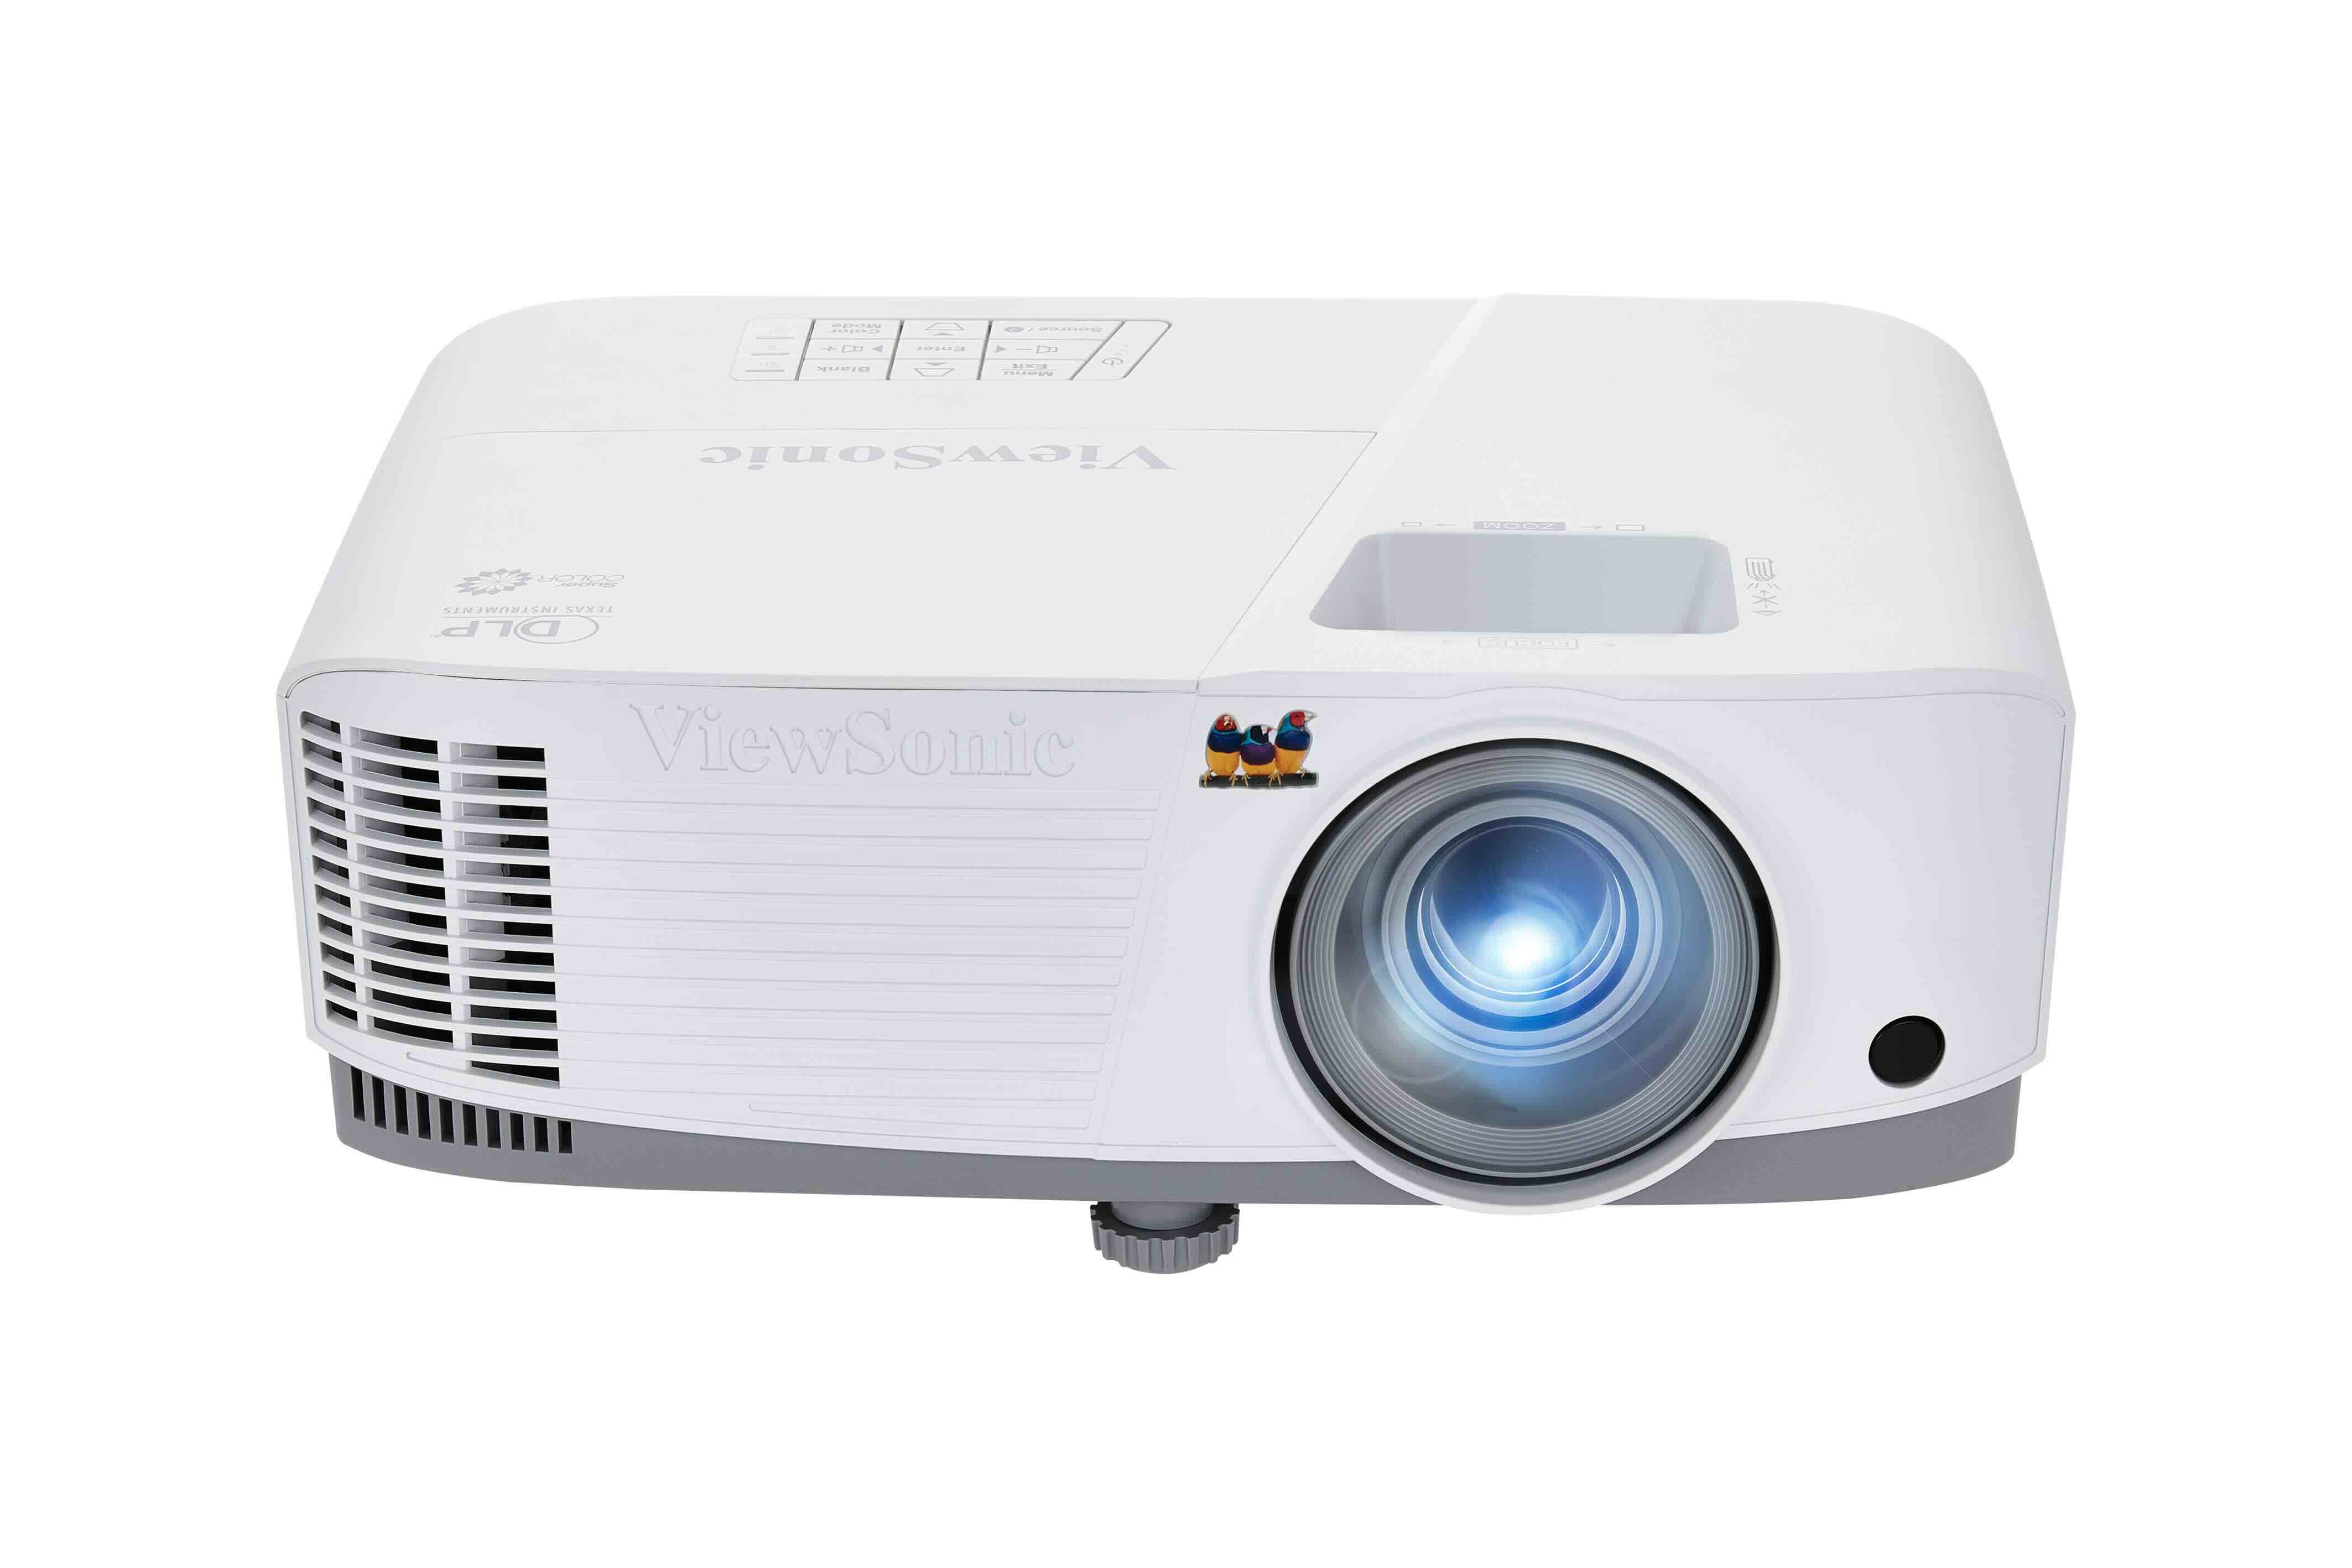 How To Use ViewSonic Projector